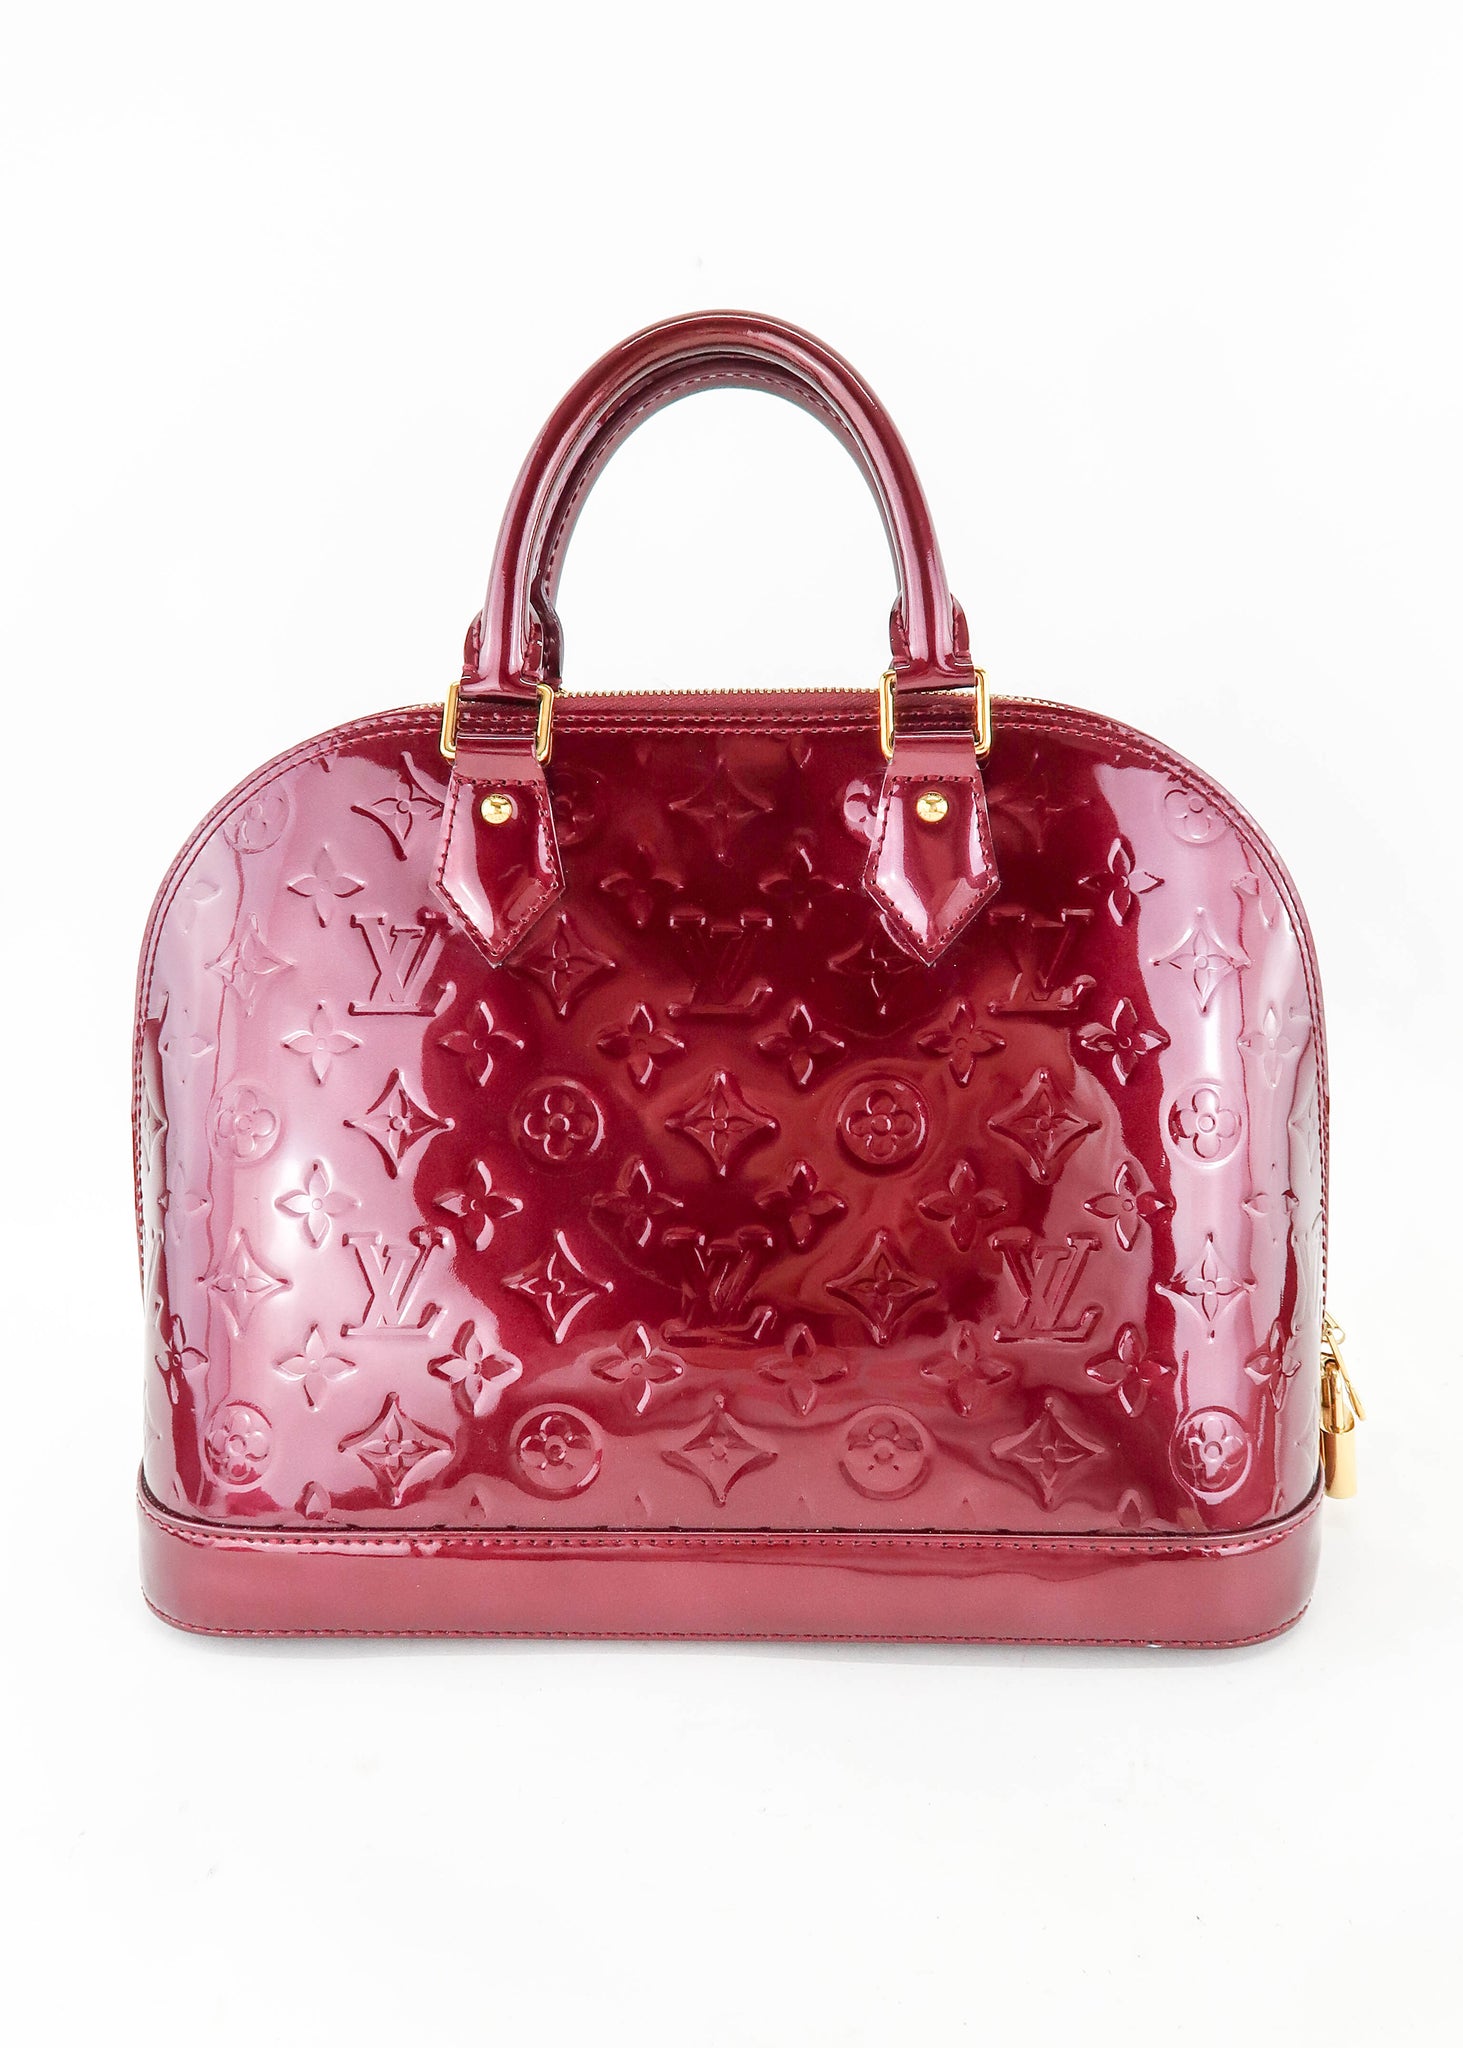 Louis Vuitton - Authenticated Alma Handbag - Patent Leather Burgundy for Women, Very Good Condition